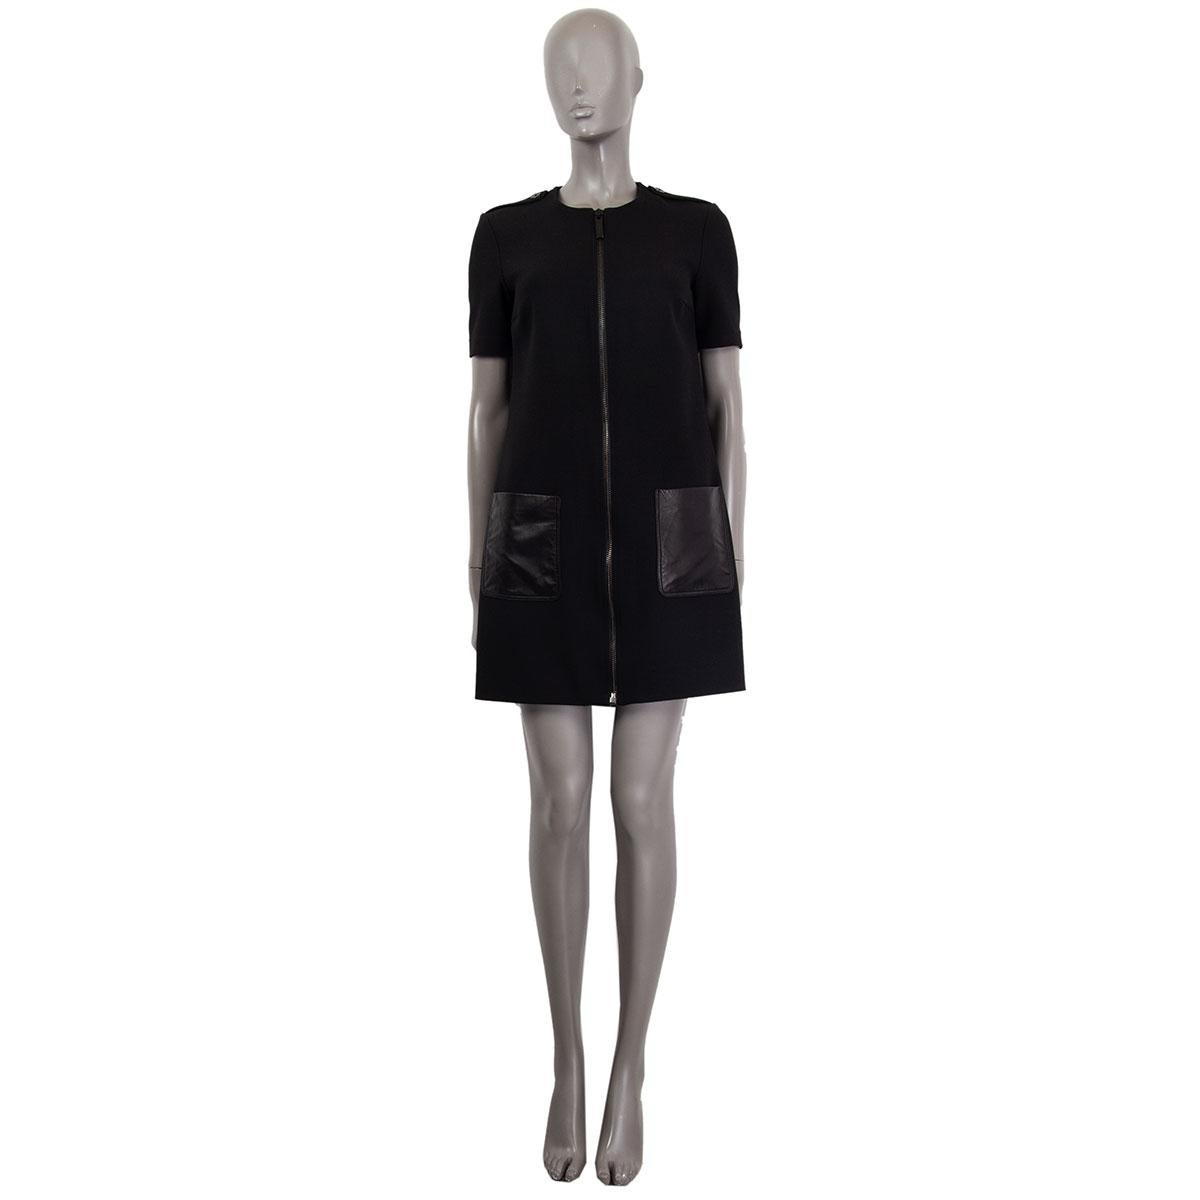 100% authentic Burberry London short sleeve tunic dress in black polyester (64%), viscose (27%), cotton (6%) and elastane (3%) with a round neck, epaulettes and two front lamb leather pockets. Closes on the front with a zipper. Lined in cupro (93%)